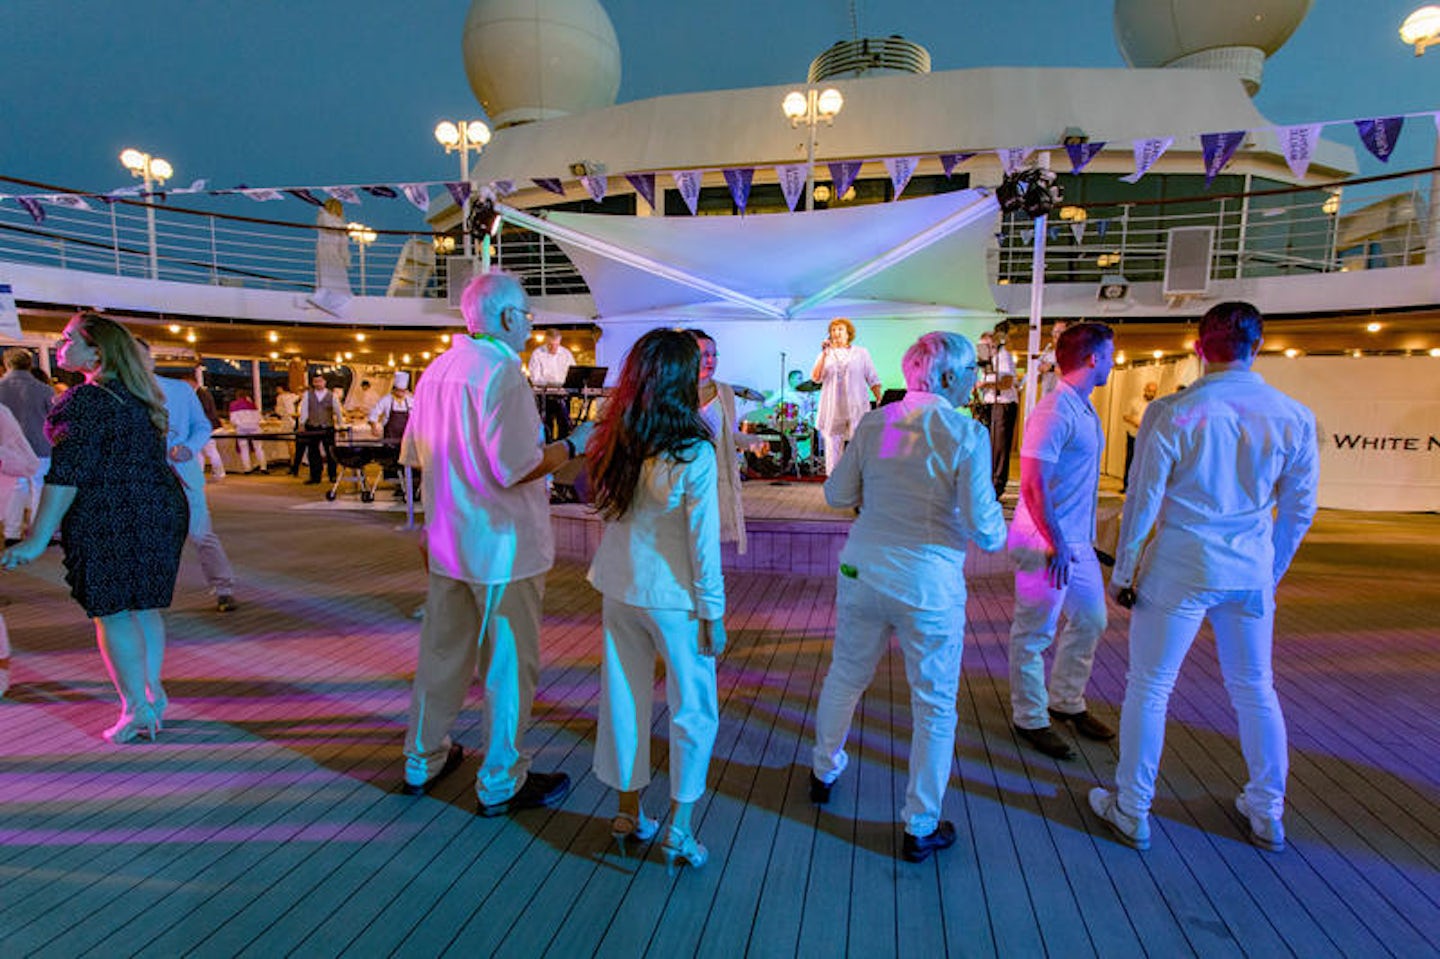 night cruise ship party